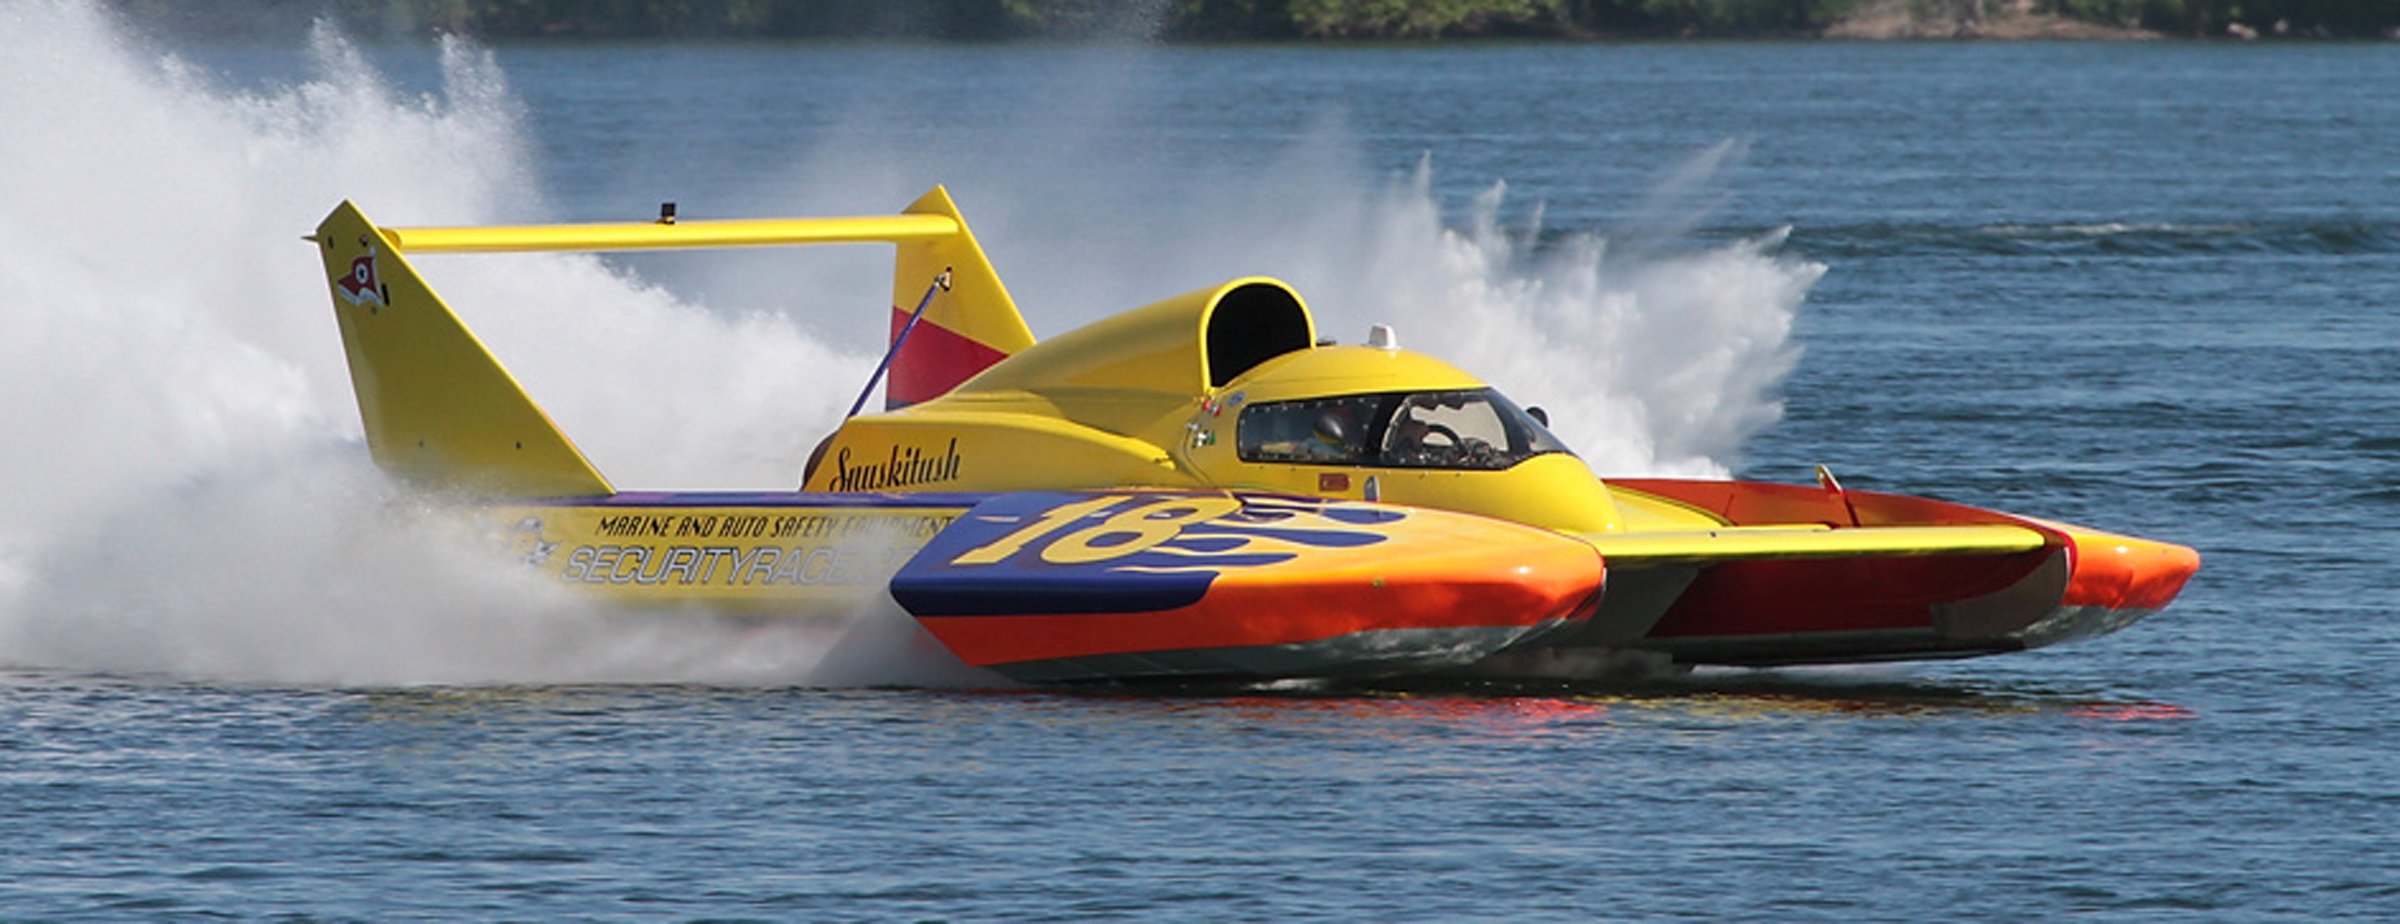 unlimited hydroplane, Race, Racing, Boat, Ship, Unlimited, Hydroplane, Jet,  10 Wallpaper